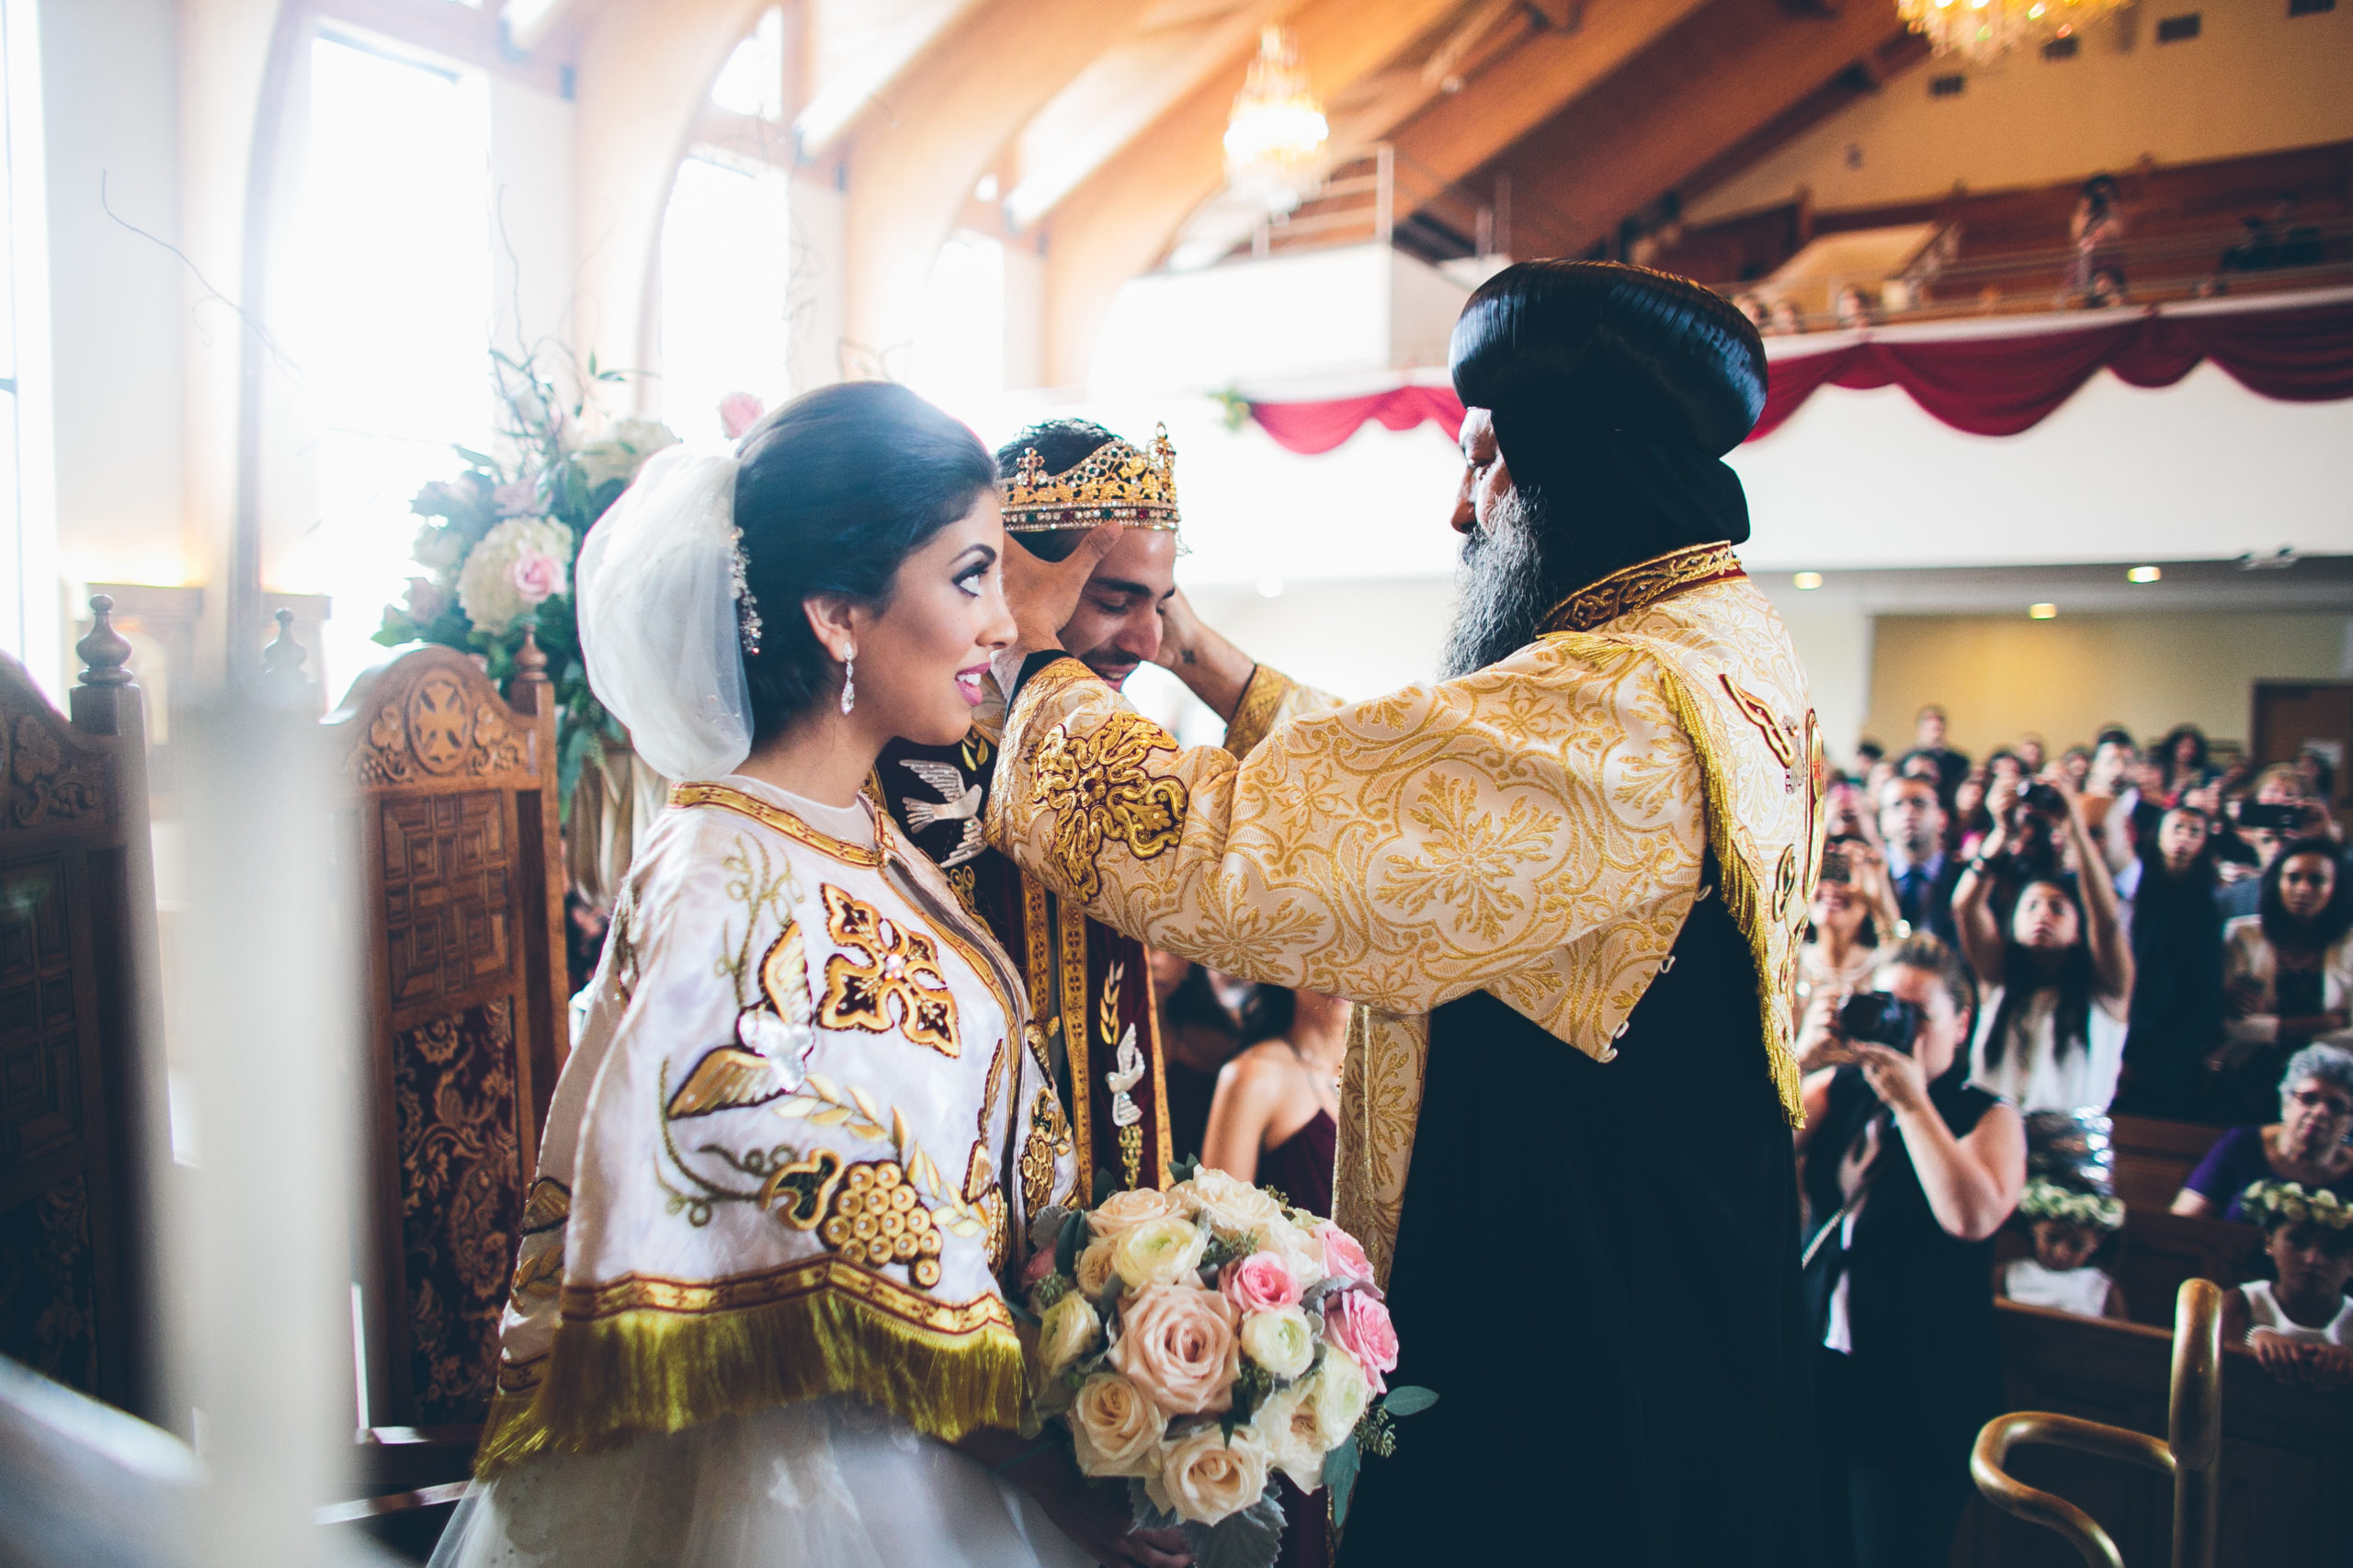 Modern Arabic Wedding Traditions & Customs You Should Know